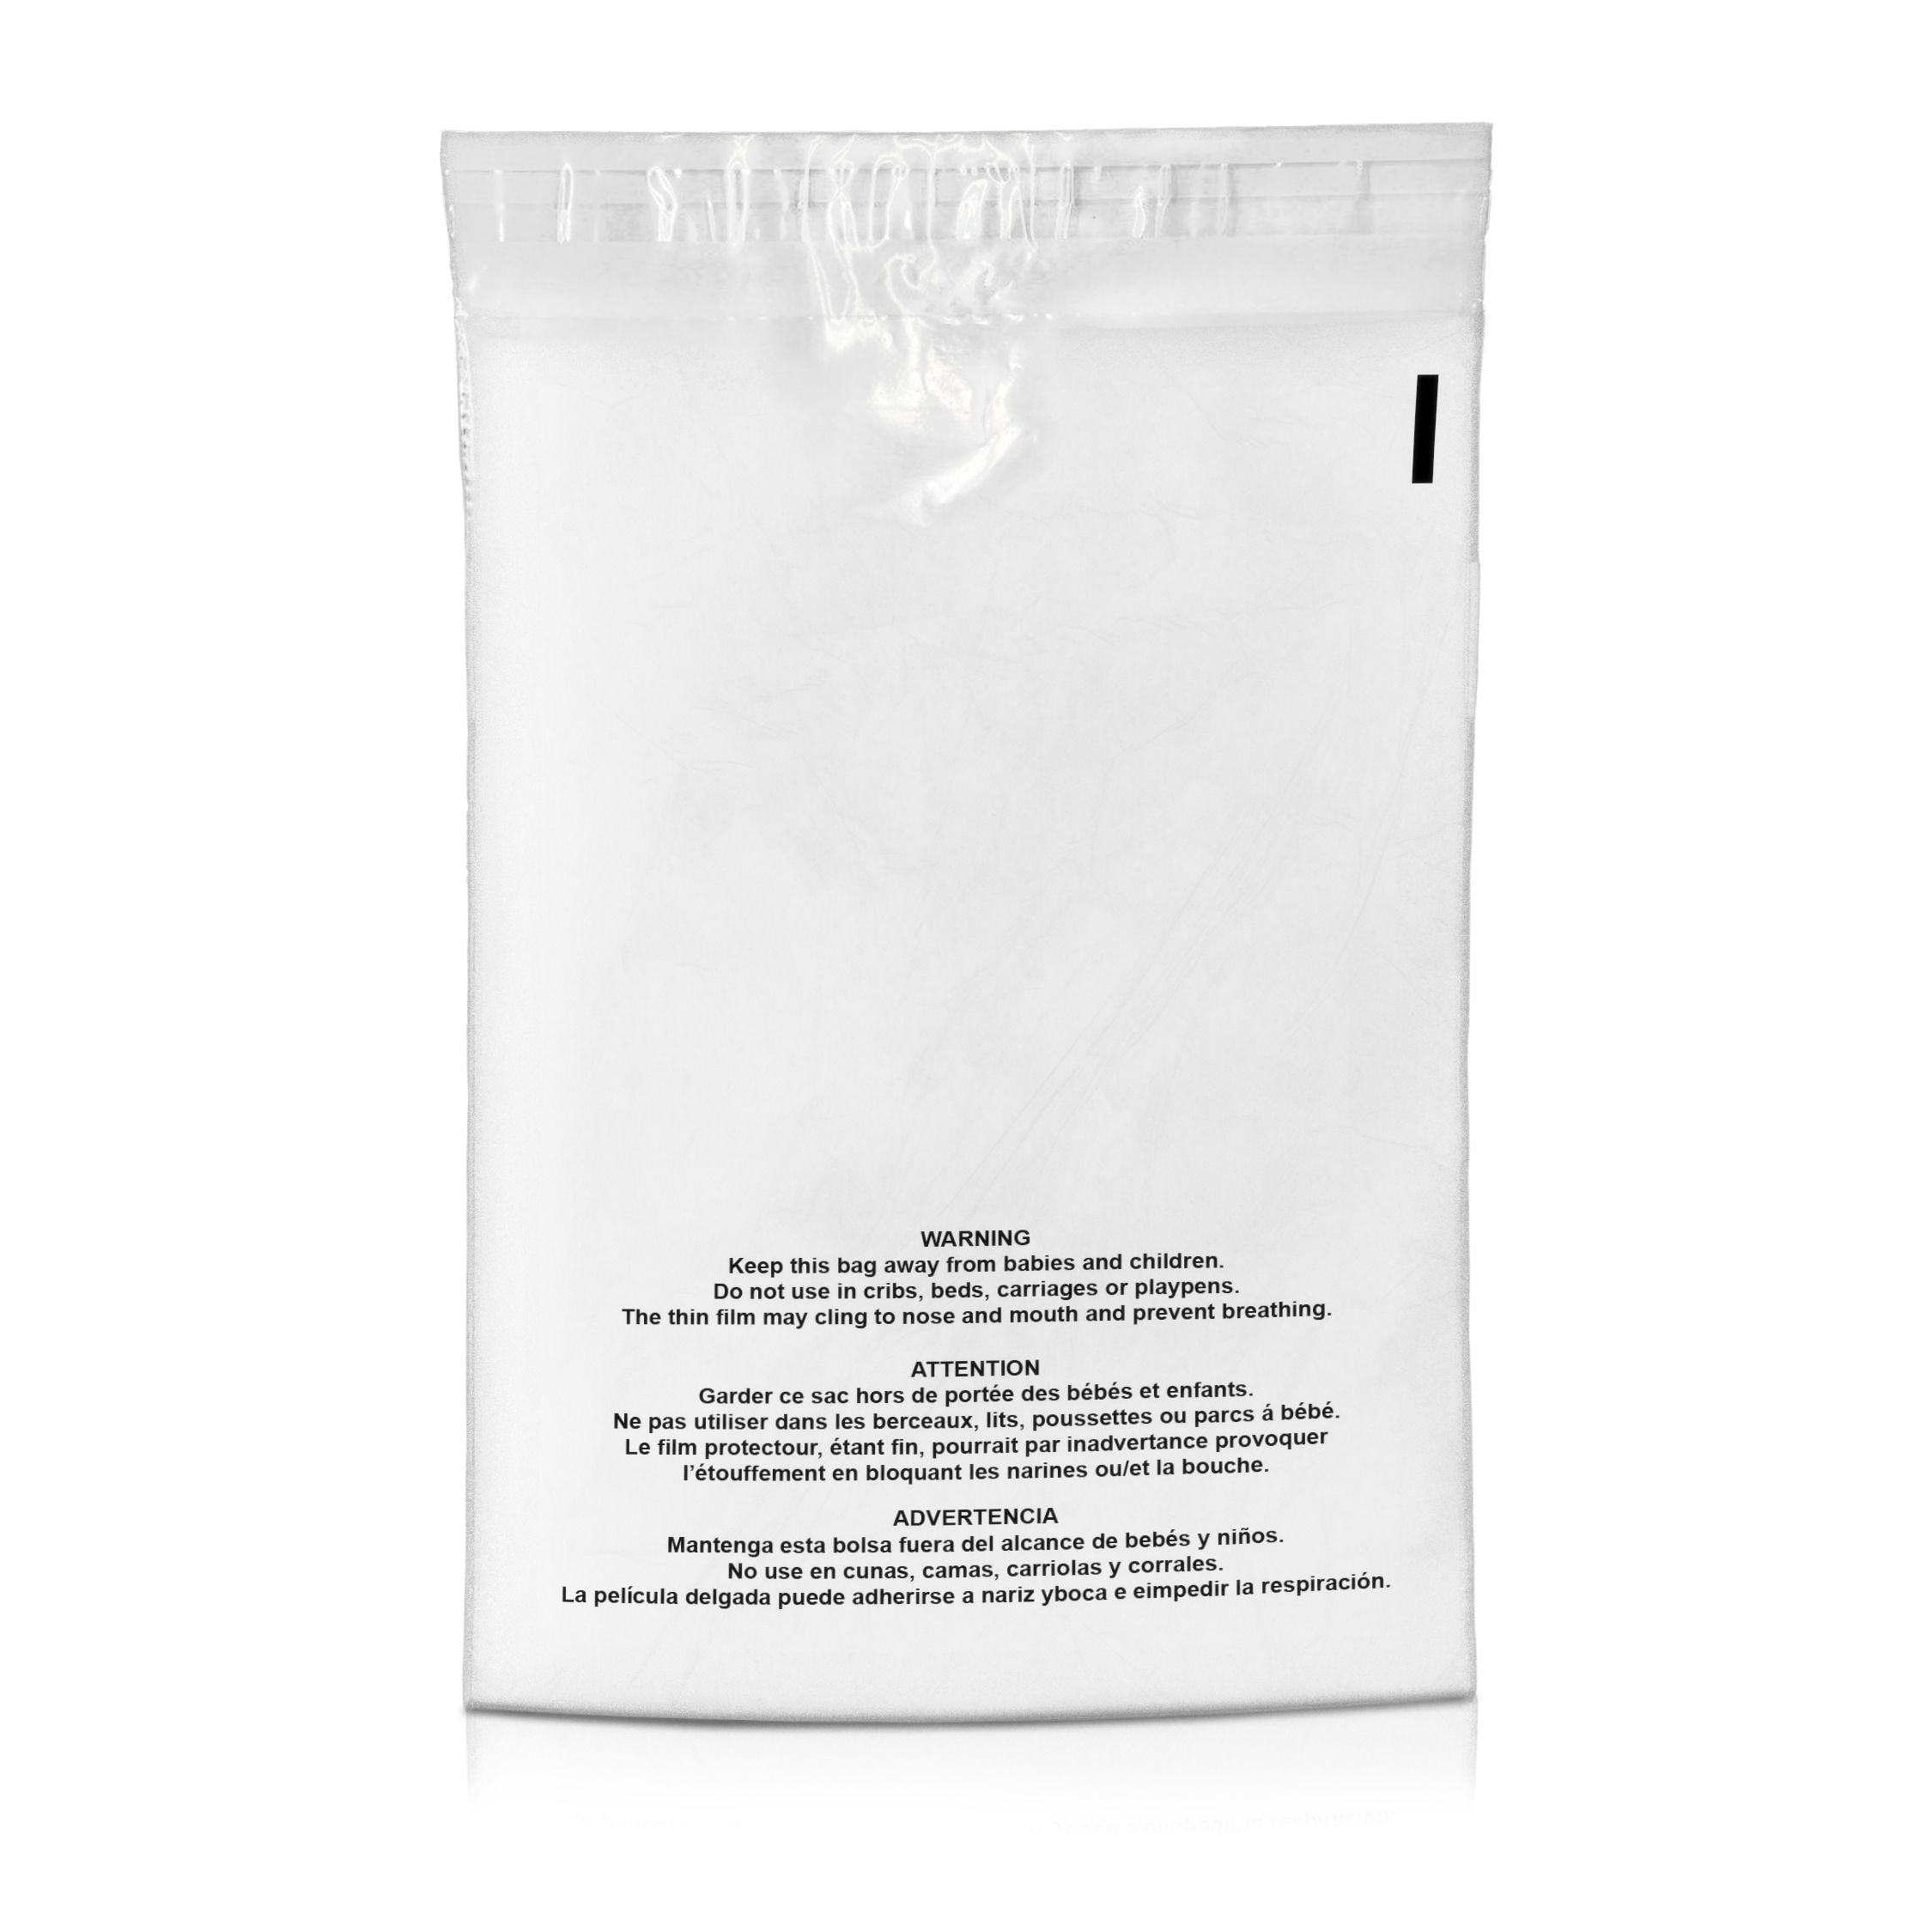 Spartan Industrial || 100 Count More Sizes Available 10 X 13” 4 Mil Heavy Duty Clear Plastic Reclosable Zip Poly Bags with Resealable Lock Seal Zipper 